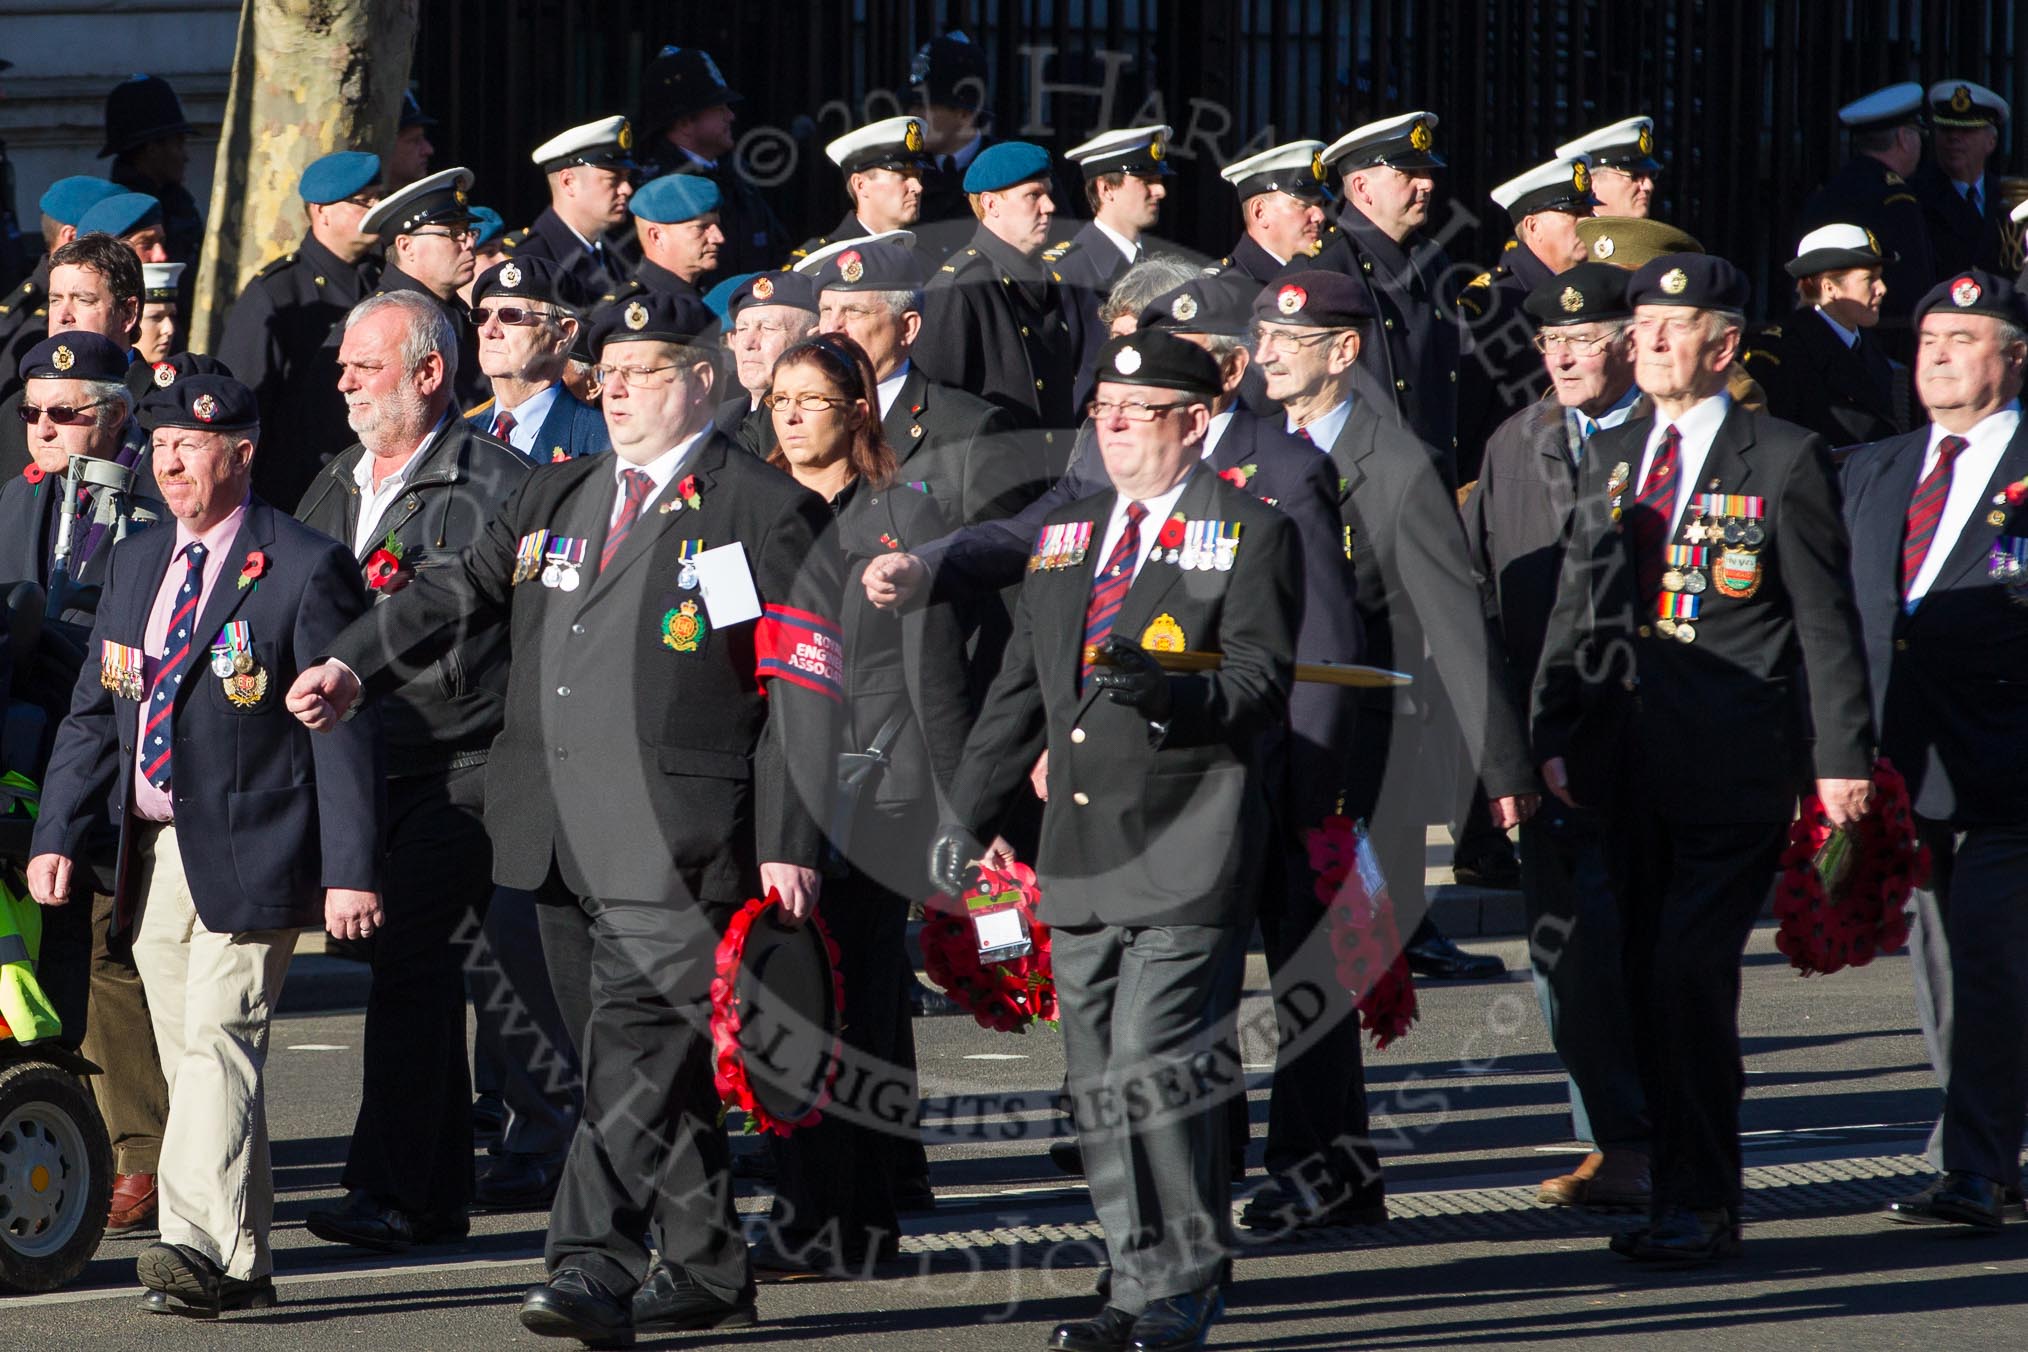 Remembrance Sunday 2012 Cenotaph March Past: Group B26 - Royal Engineers Association..
Whitehall, Cenotaph,
London SW1,

United Kingdom,
on 11 November 2012 at 11:58, image #976